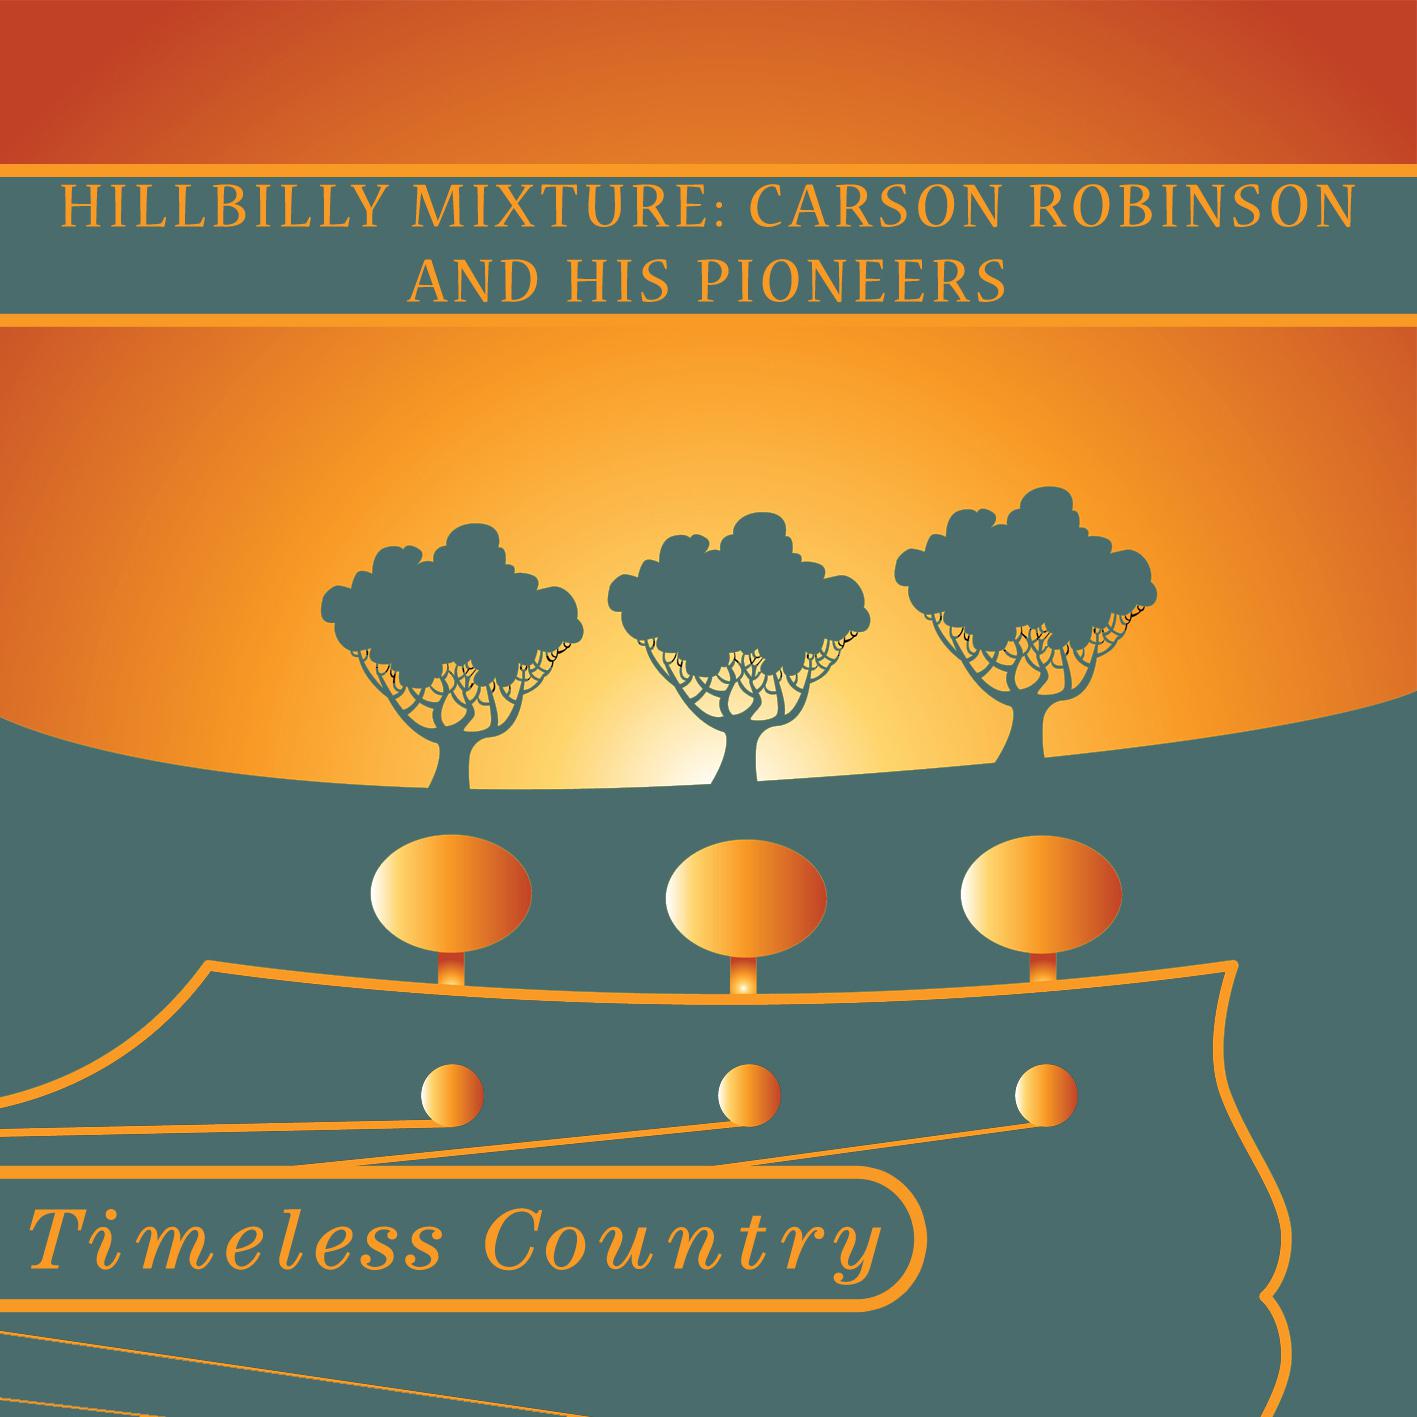 Timeless Country: Hillbilly Mixture: Carson Robison And His Pioneers